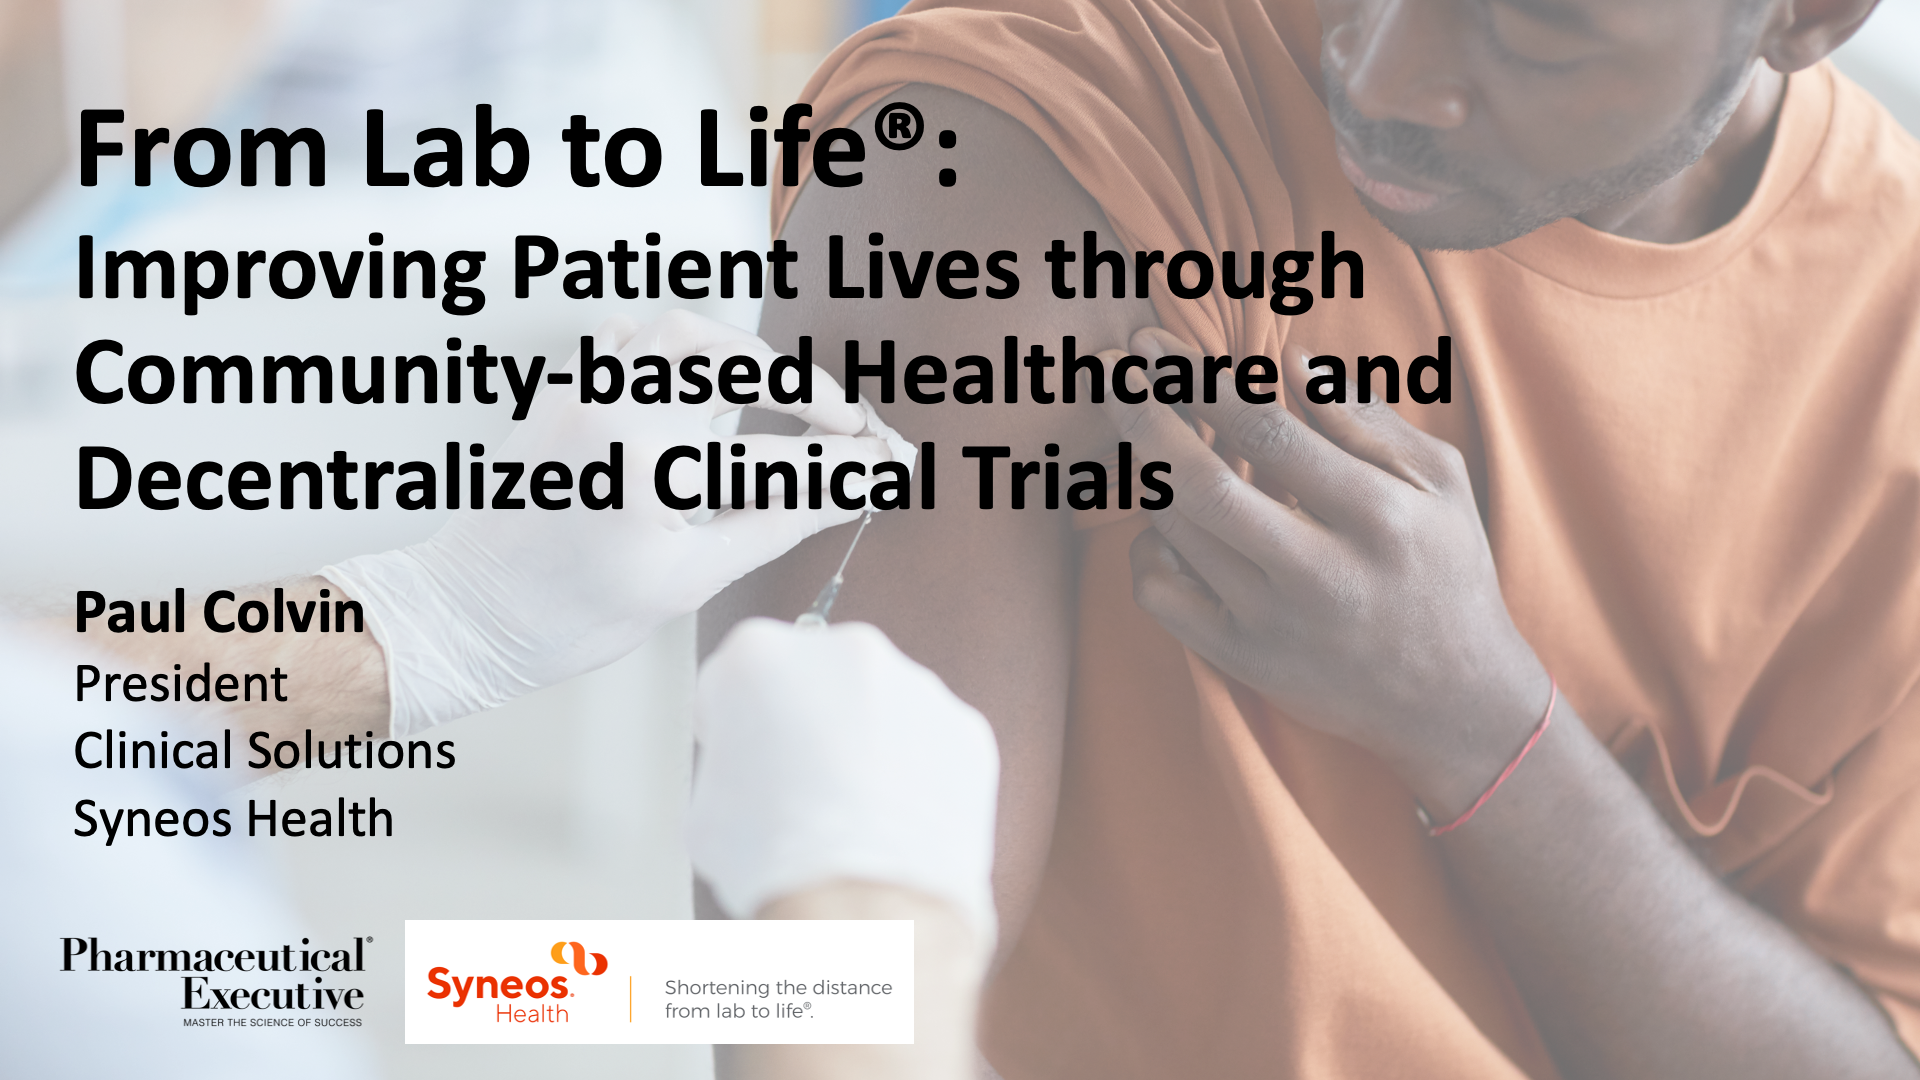 From Lab to Life: Improving Patient Lives through Community-based Healthcare and Decentralized Clinical Trials